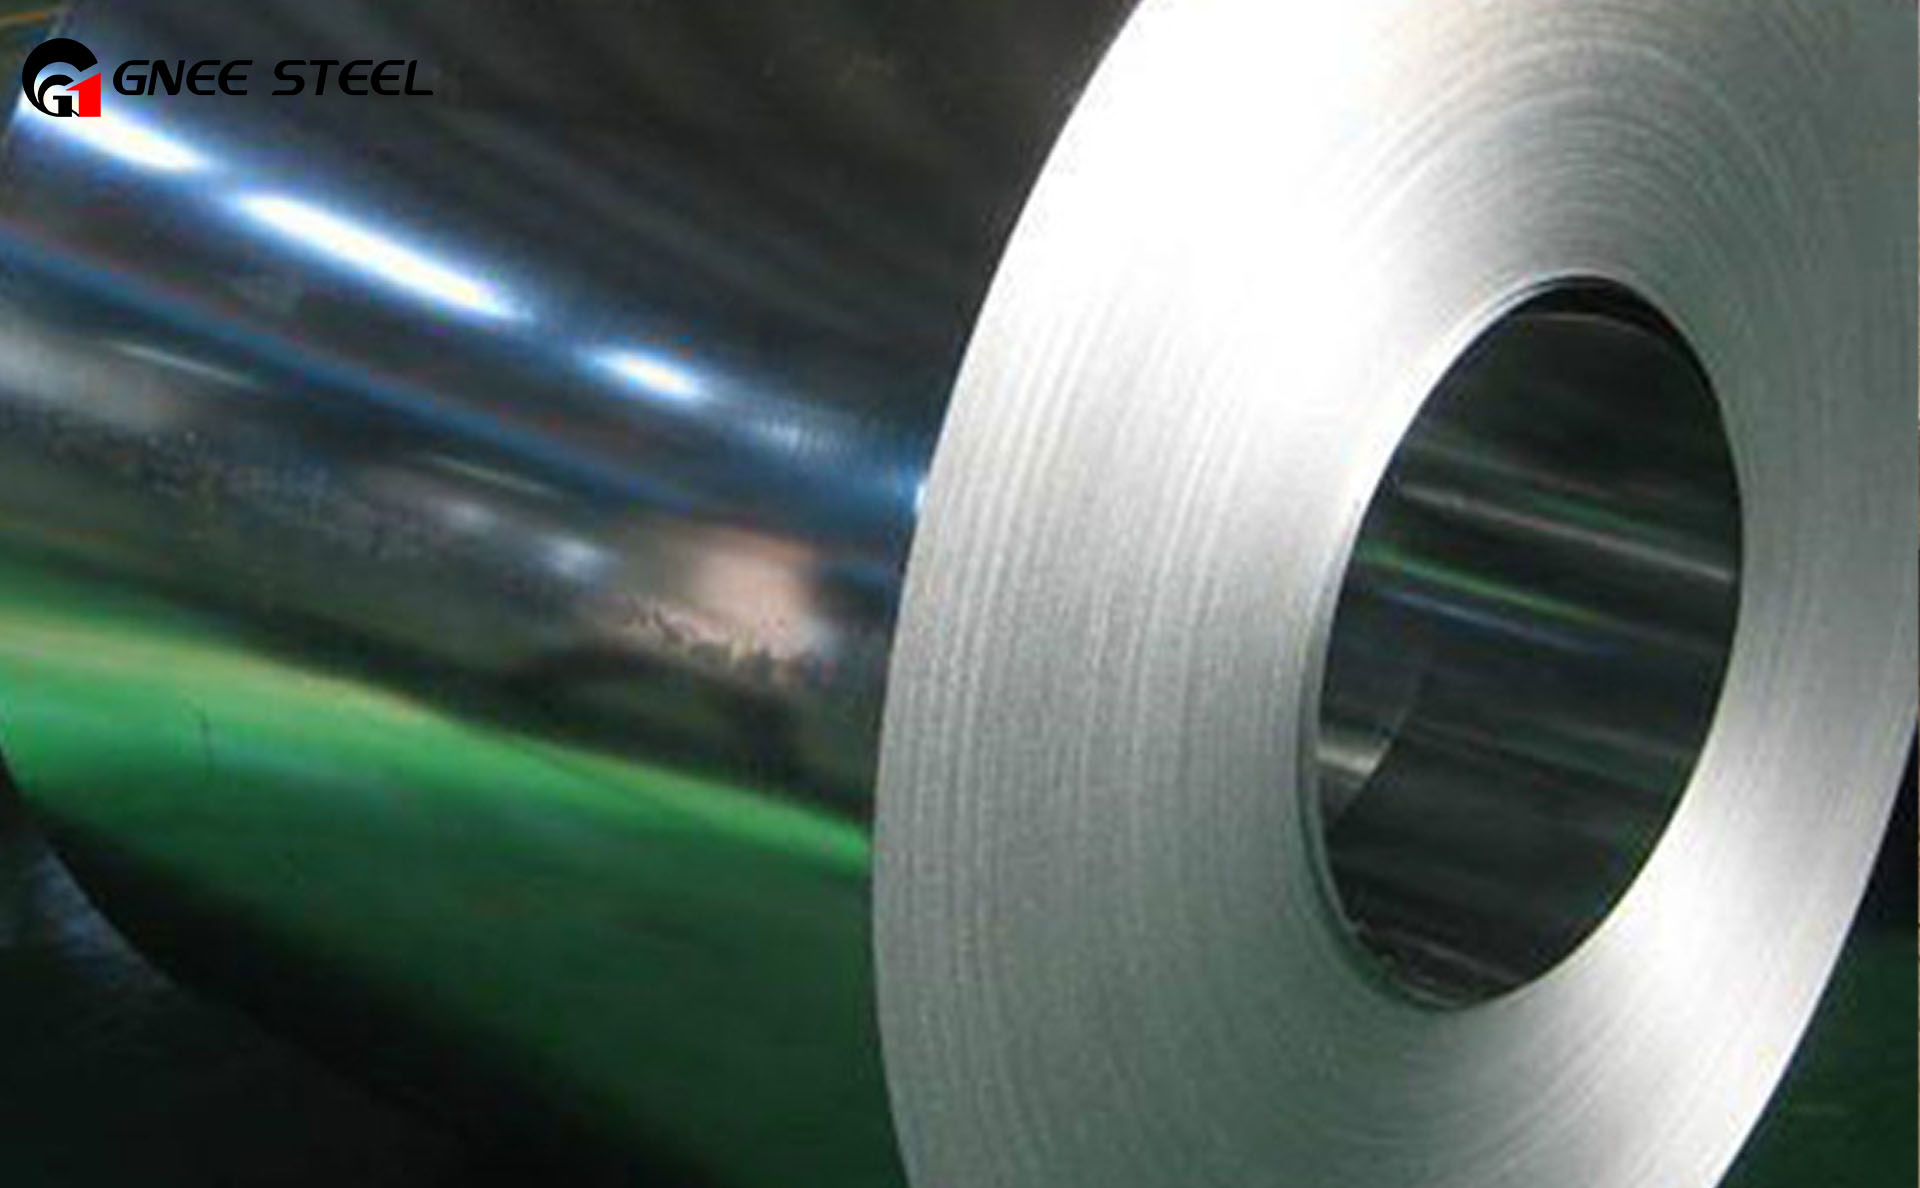 GNEE Steel Group High Quality Galvanized Steel Coils